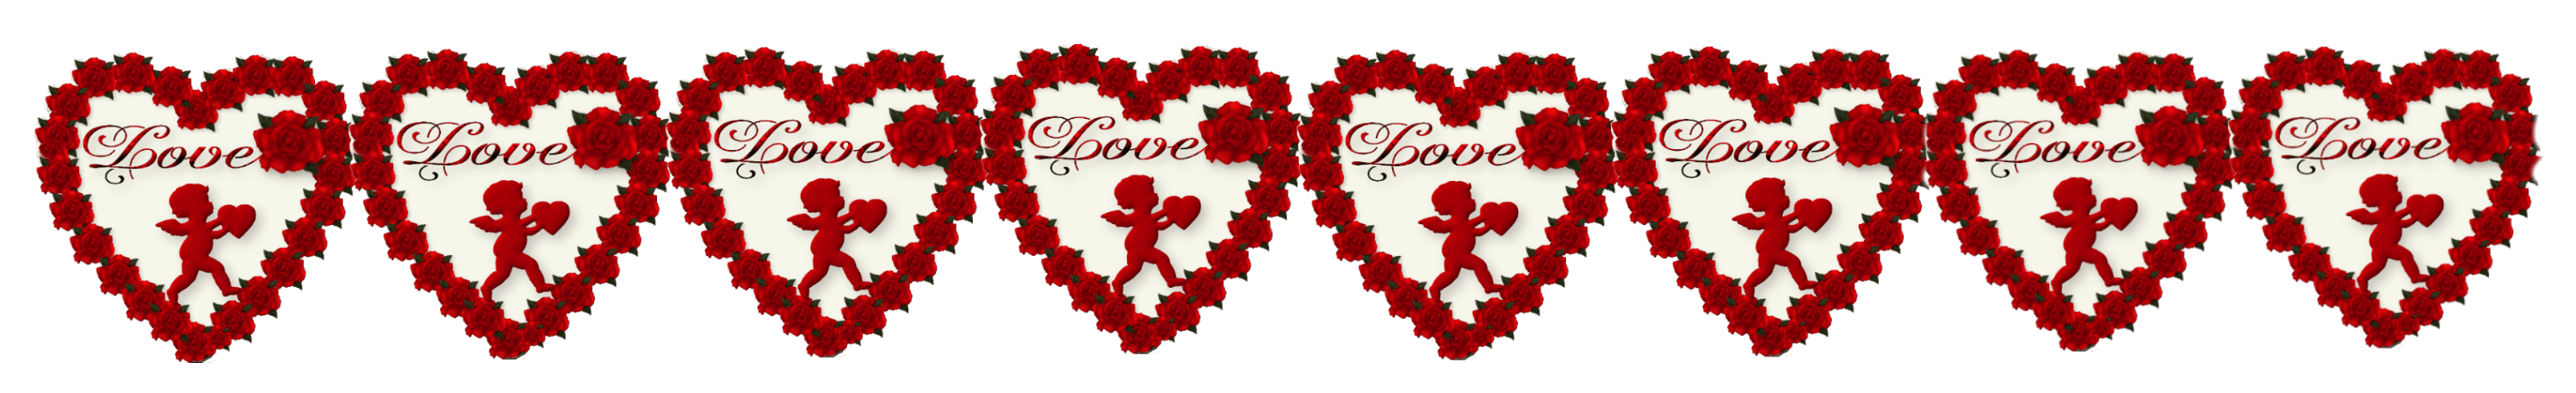 Valentines Day Hearts Border Decor PNG Picture